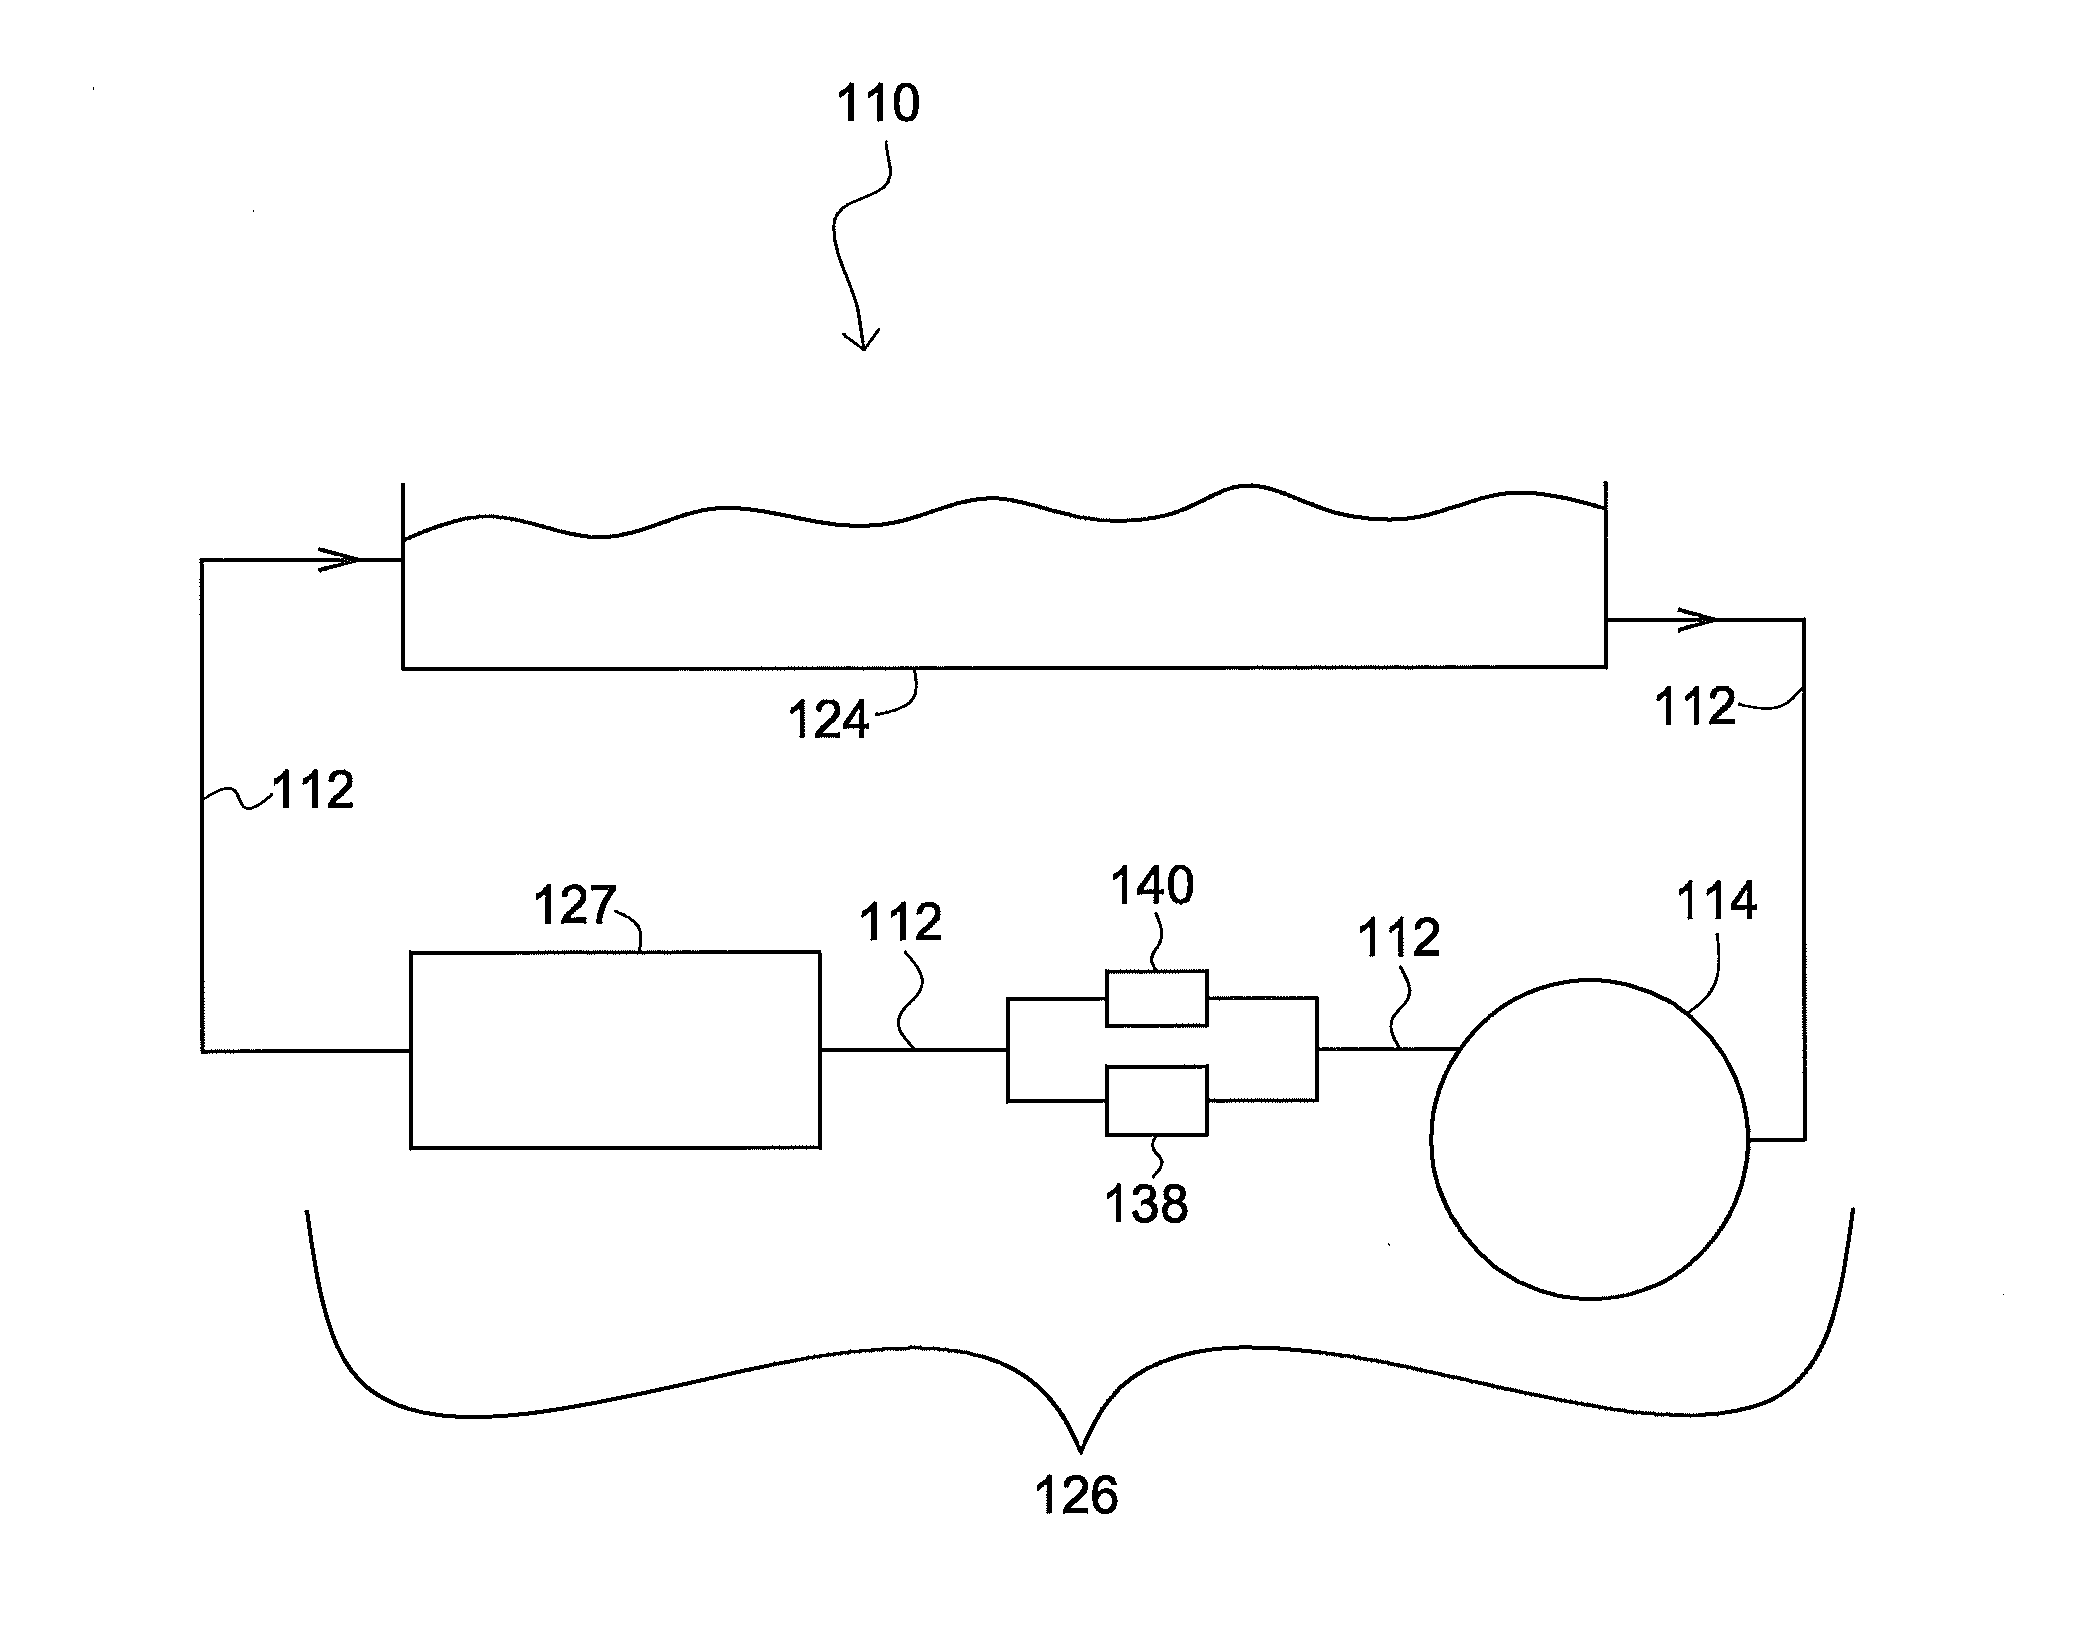 Water treatment device and methods of use